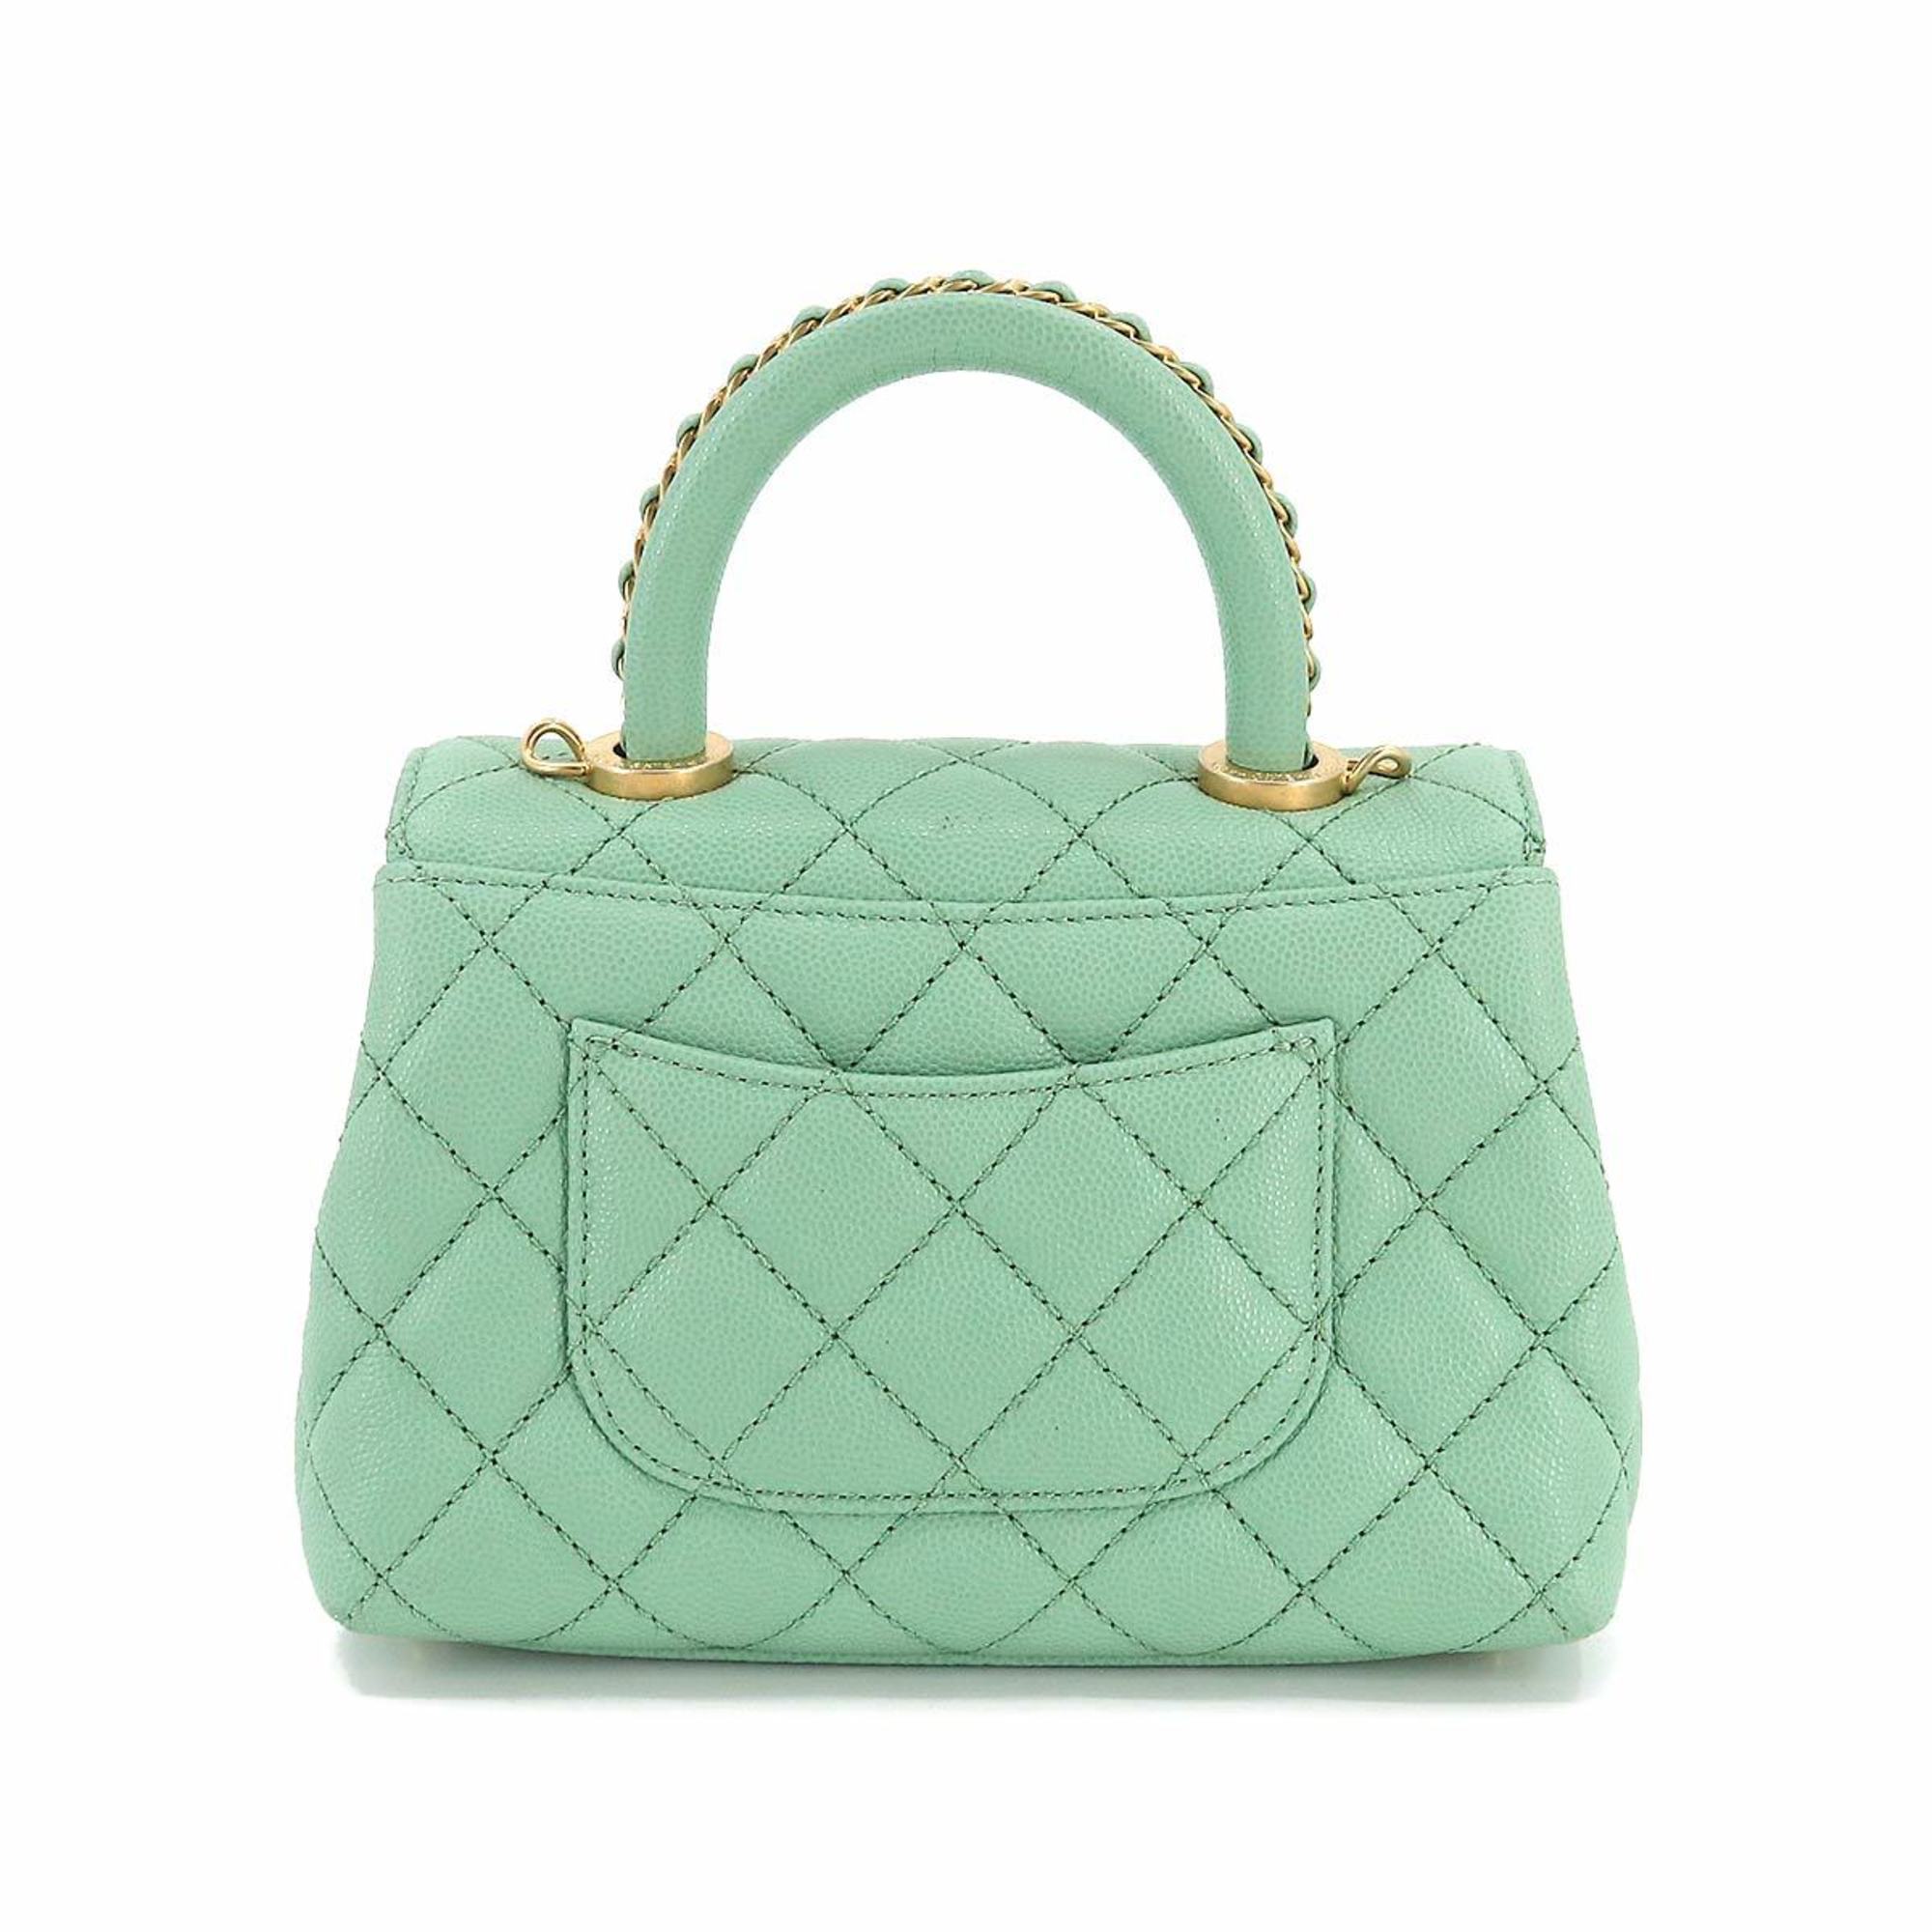 CHANEL Coco Handle Matelasse 2way Hand Shoulder Bag Caviar Skin Leather Green AS2215